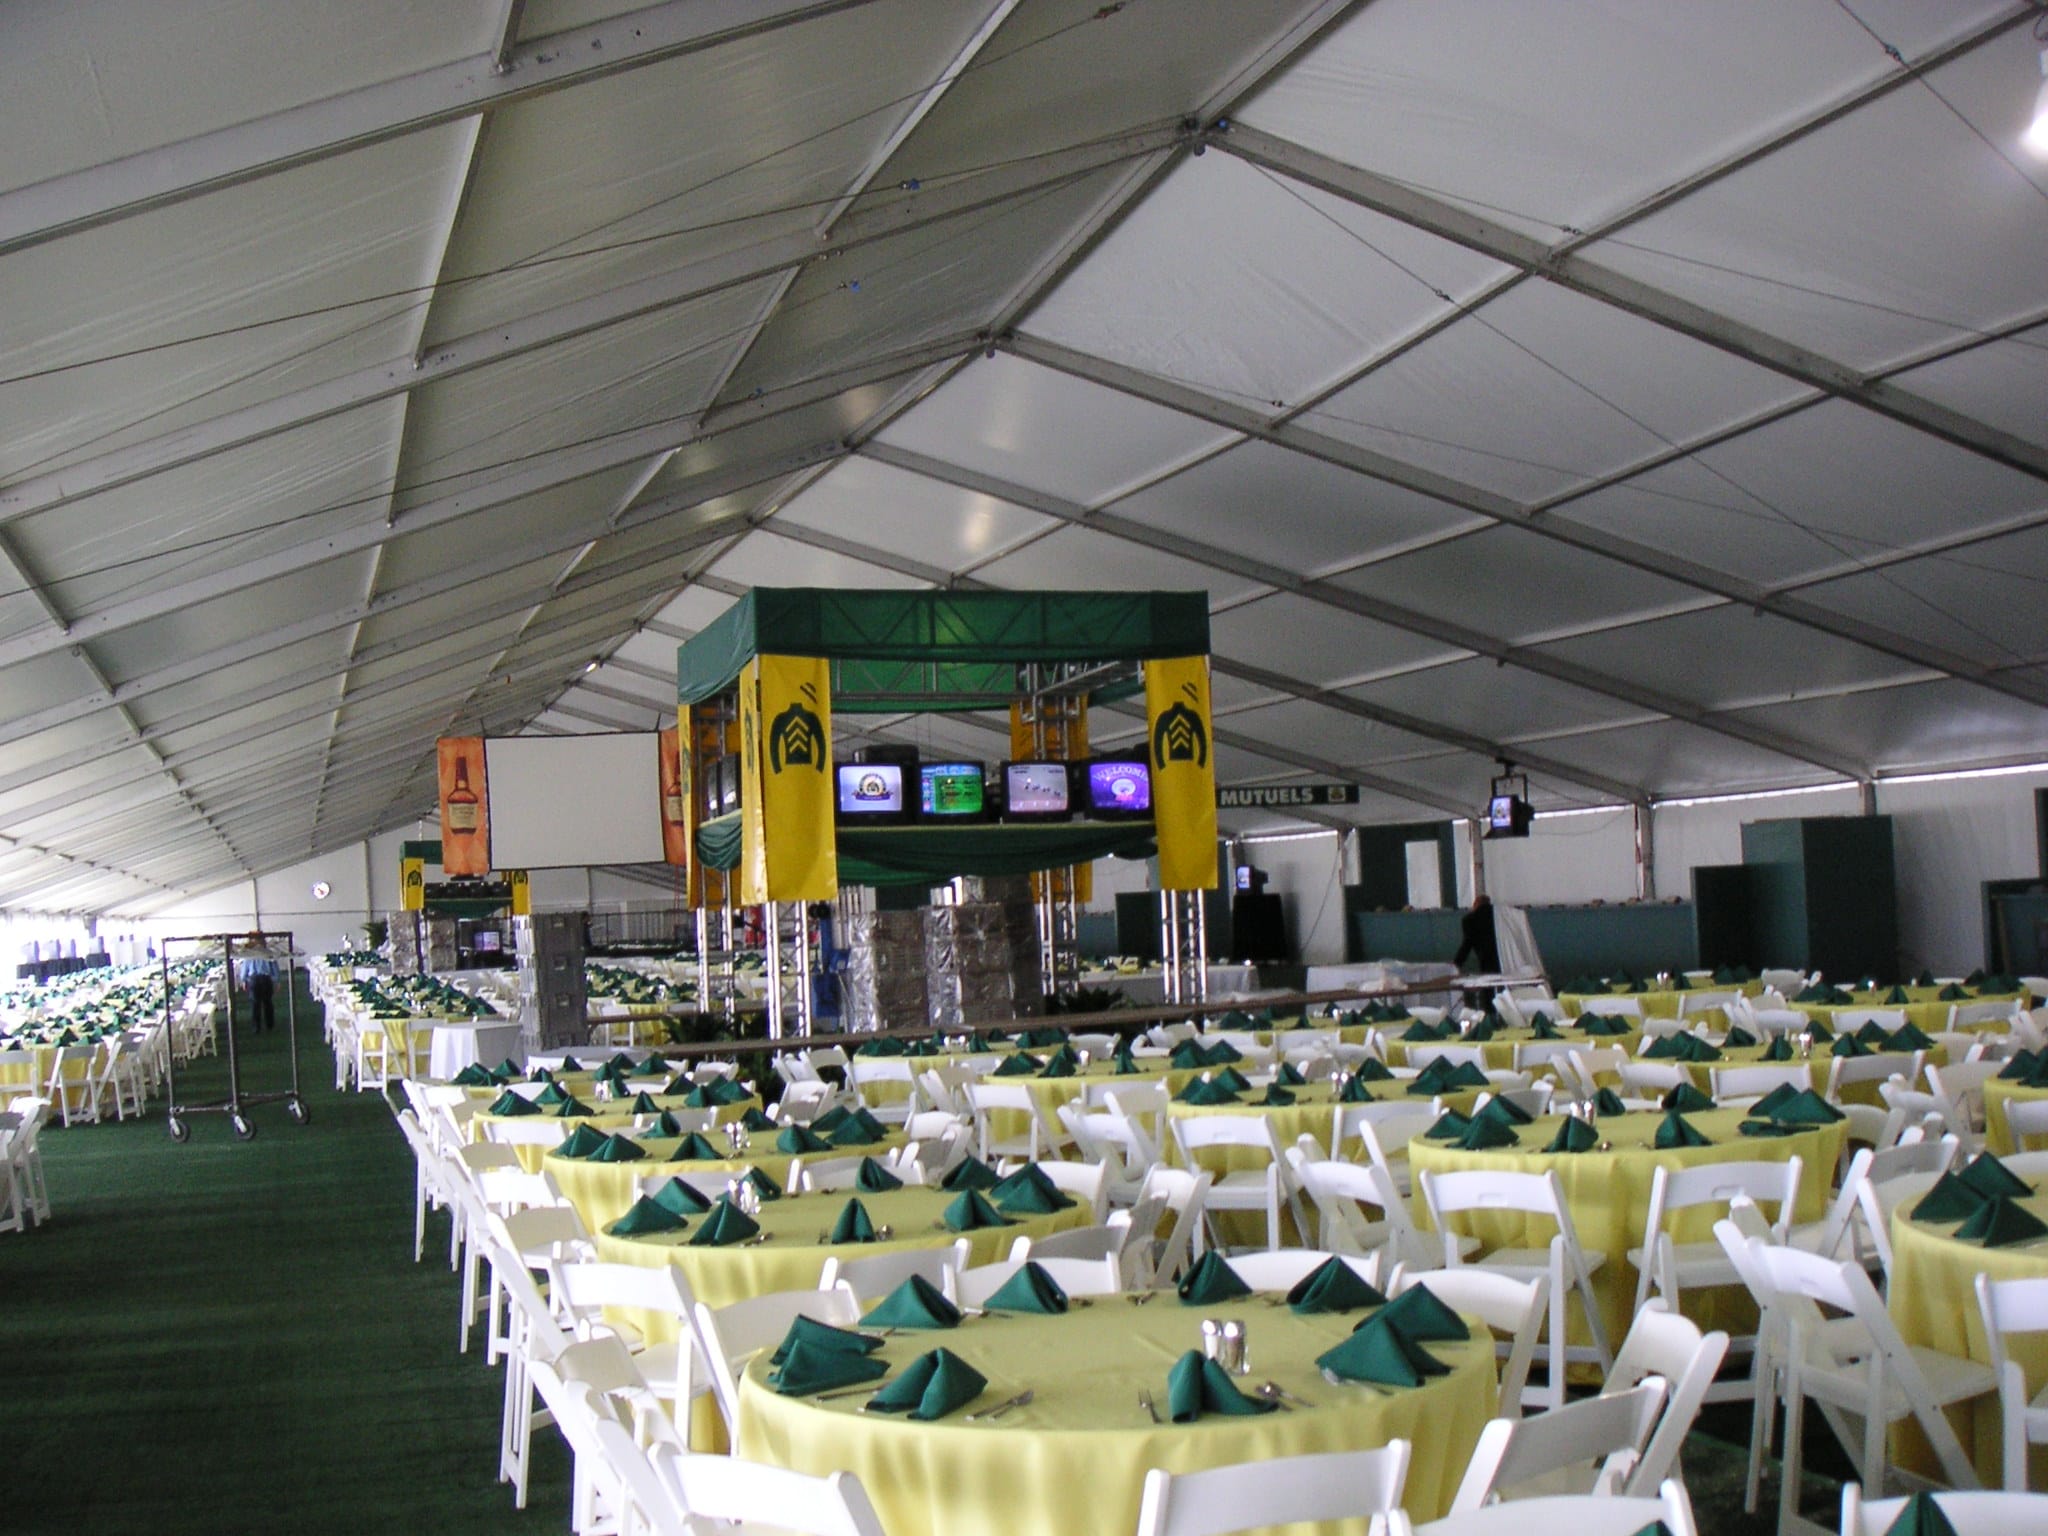 Clearspan Tent Fundraiser Event | American Pavilion